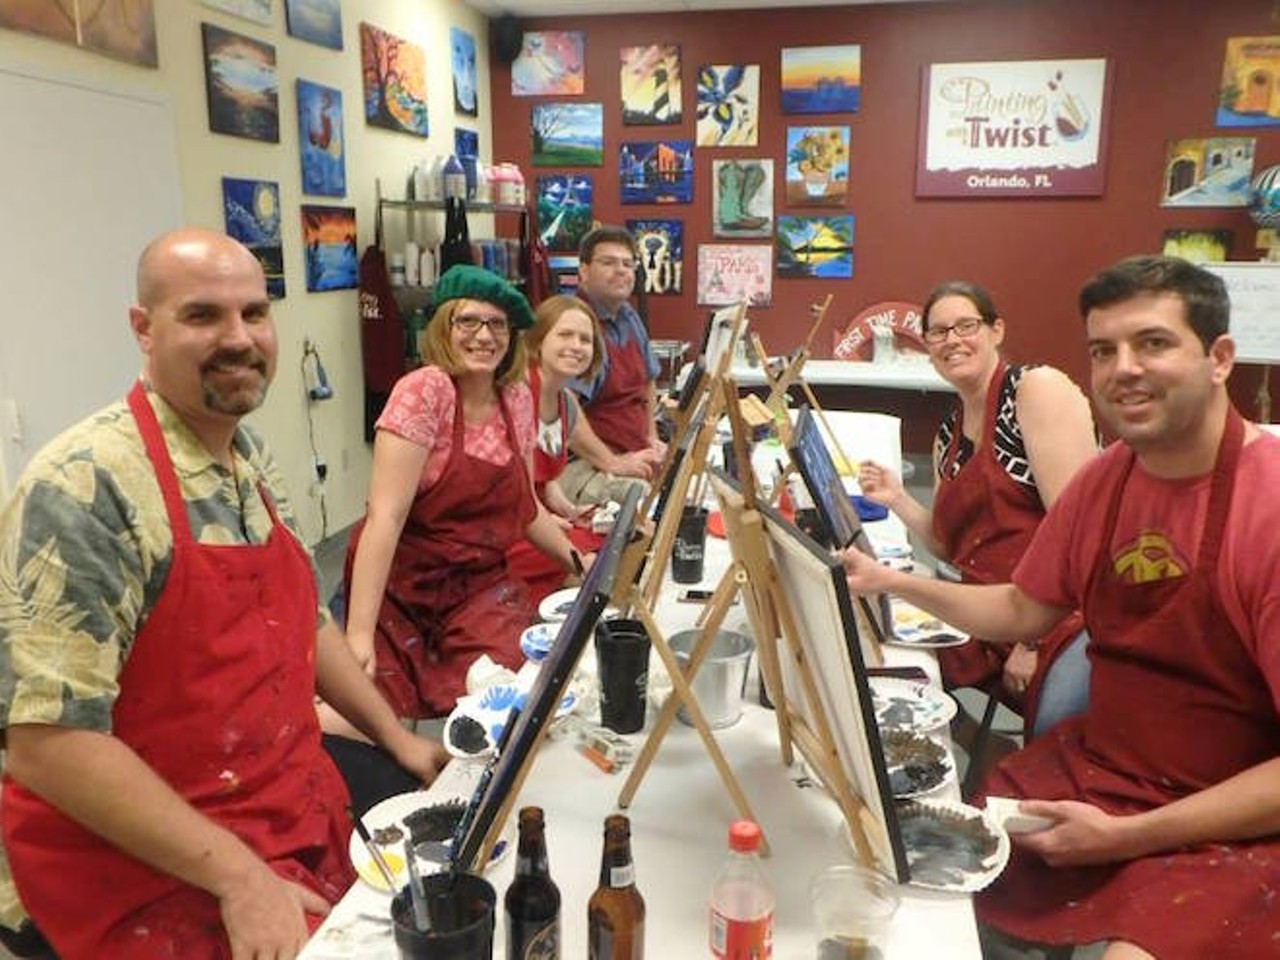 Painting With a Twist
6700 Conroy Windermere Road, 407-601-7800, paintingwithatwist.com/orlando
You don't have to be Matisse to put a paintbrush on a canvas and drink some wine. Go with a group and let the wine do the work while you chat up the cutie next to you.Photo via Painting with a Twist on Facebook